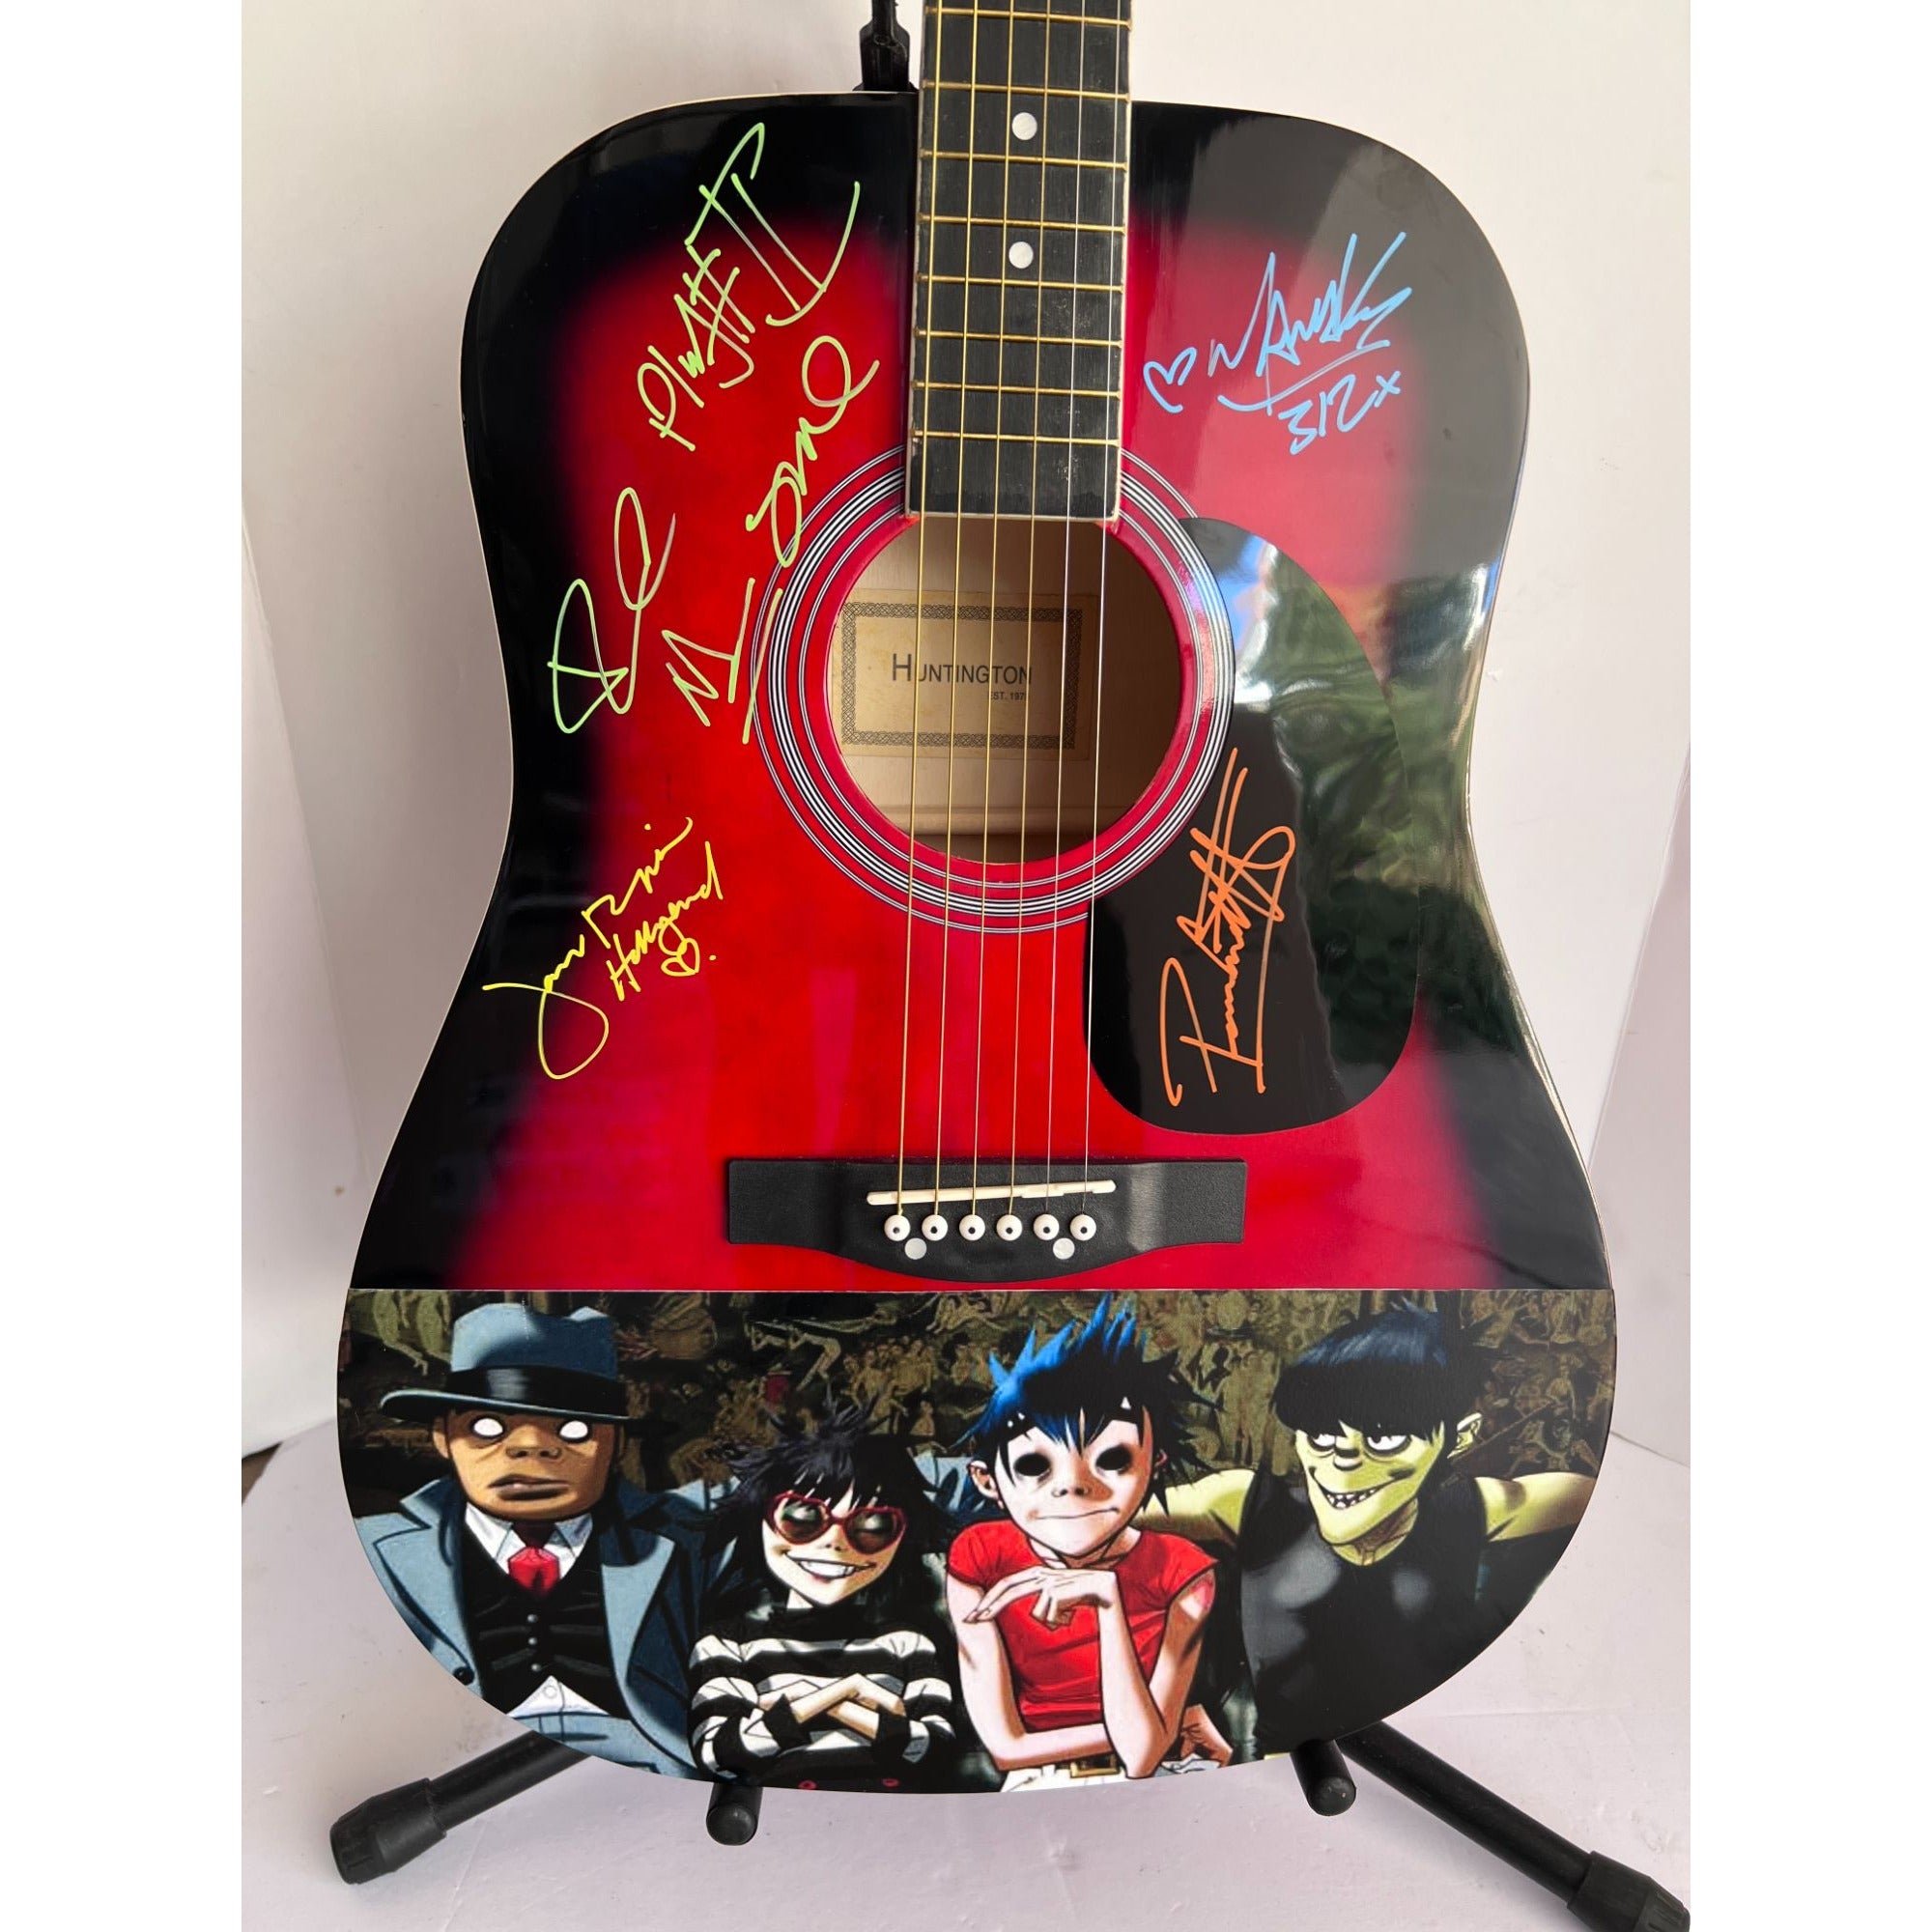 Gorillaz Mick Jones Damon Albarn One of A kind 39' inch full size acoustic guitar signed with proof